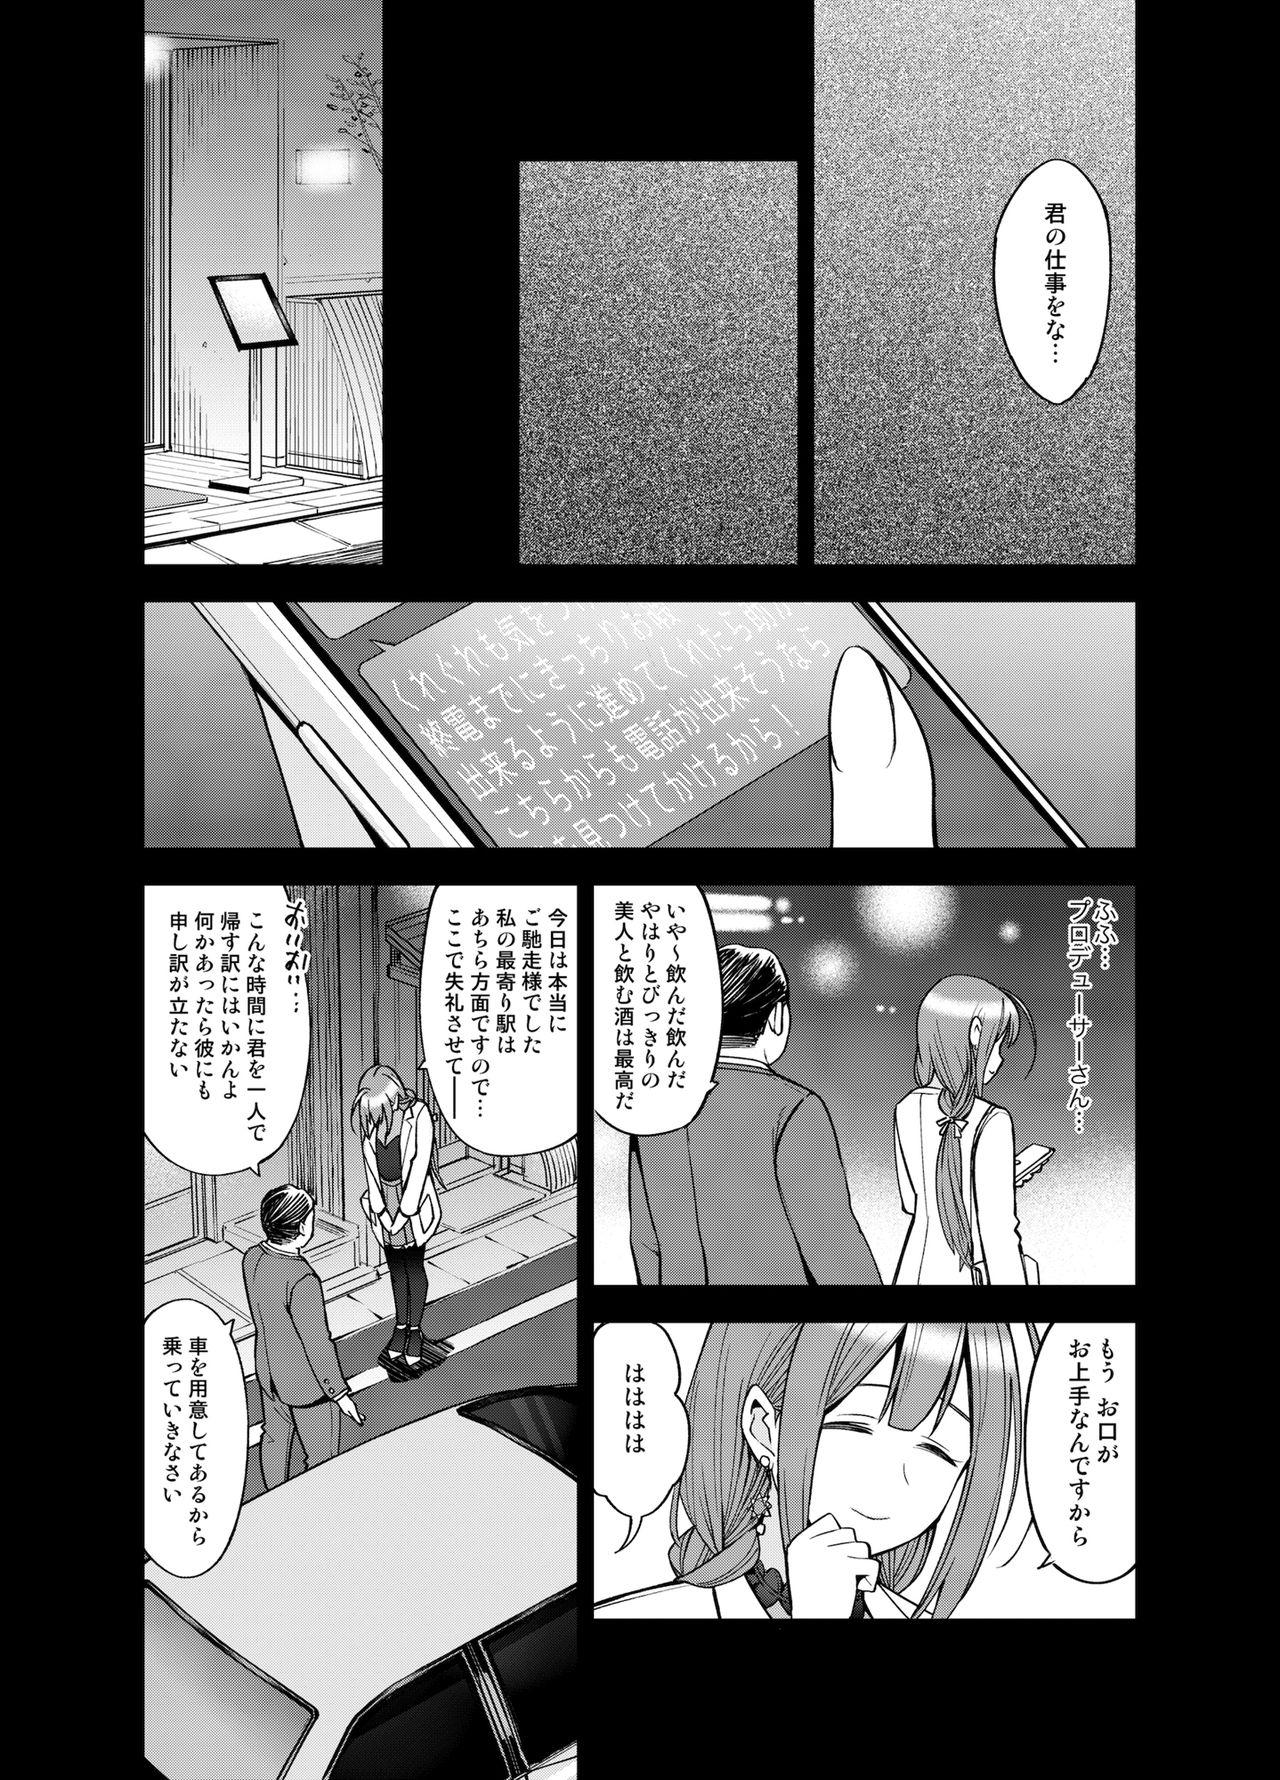 Mofos Night Blooming - The idolmaster Bedroom - Page 9